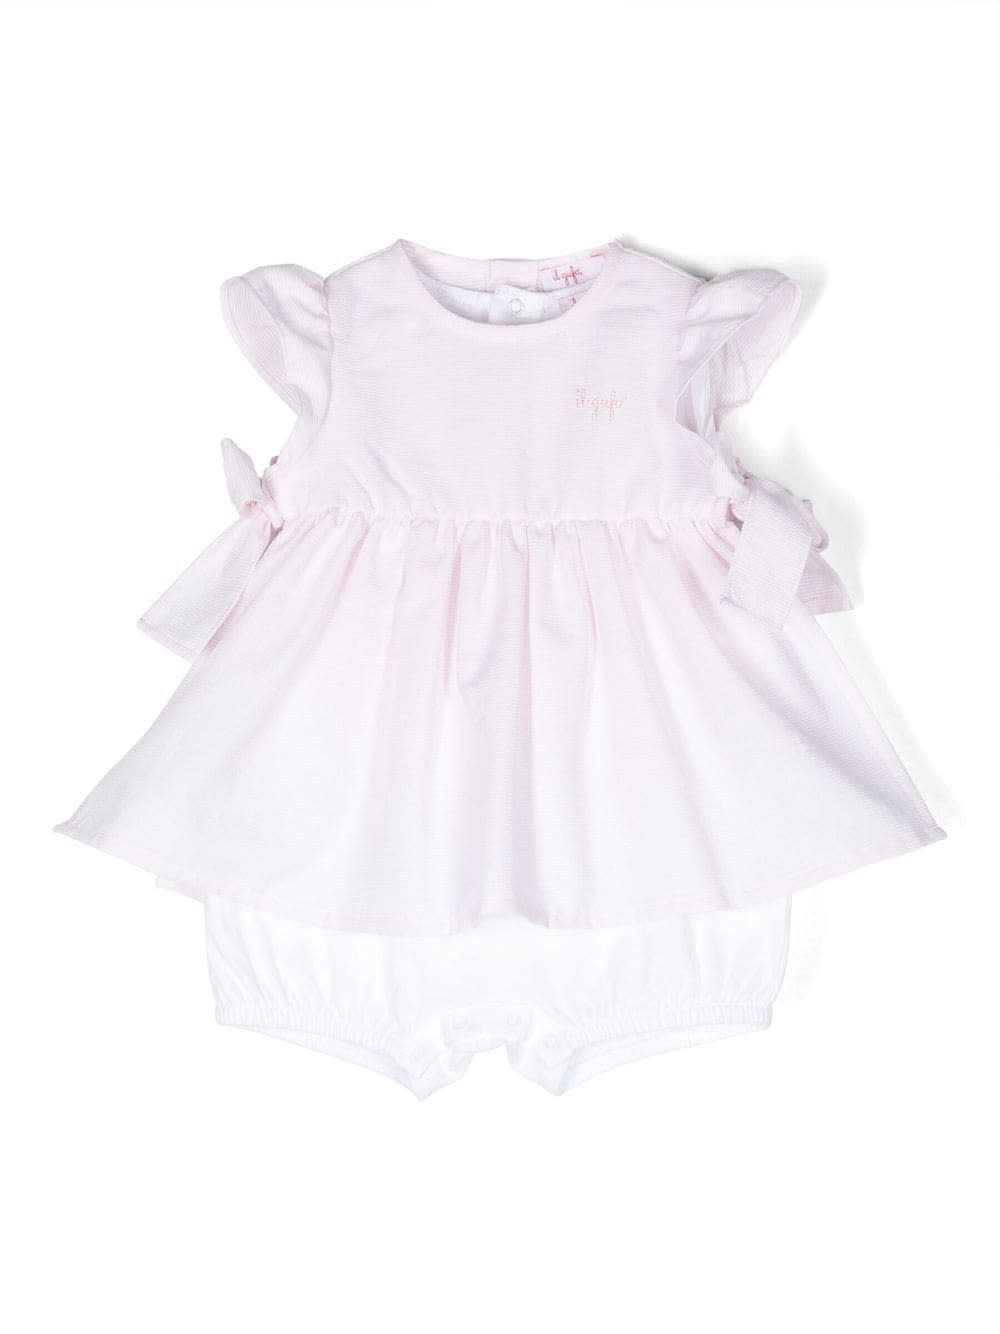 IL GUFO PINK AND WHITE SHORT PLAYSUIT WITH OTTOMAN DETAIL